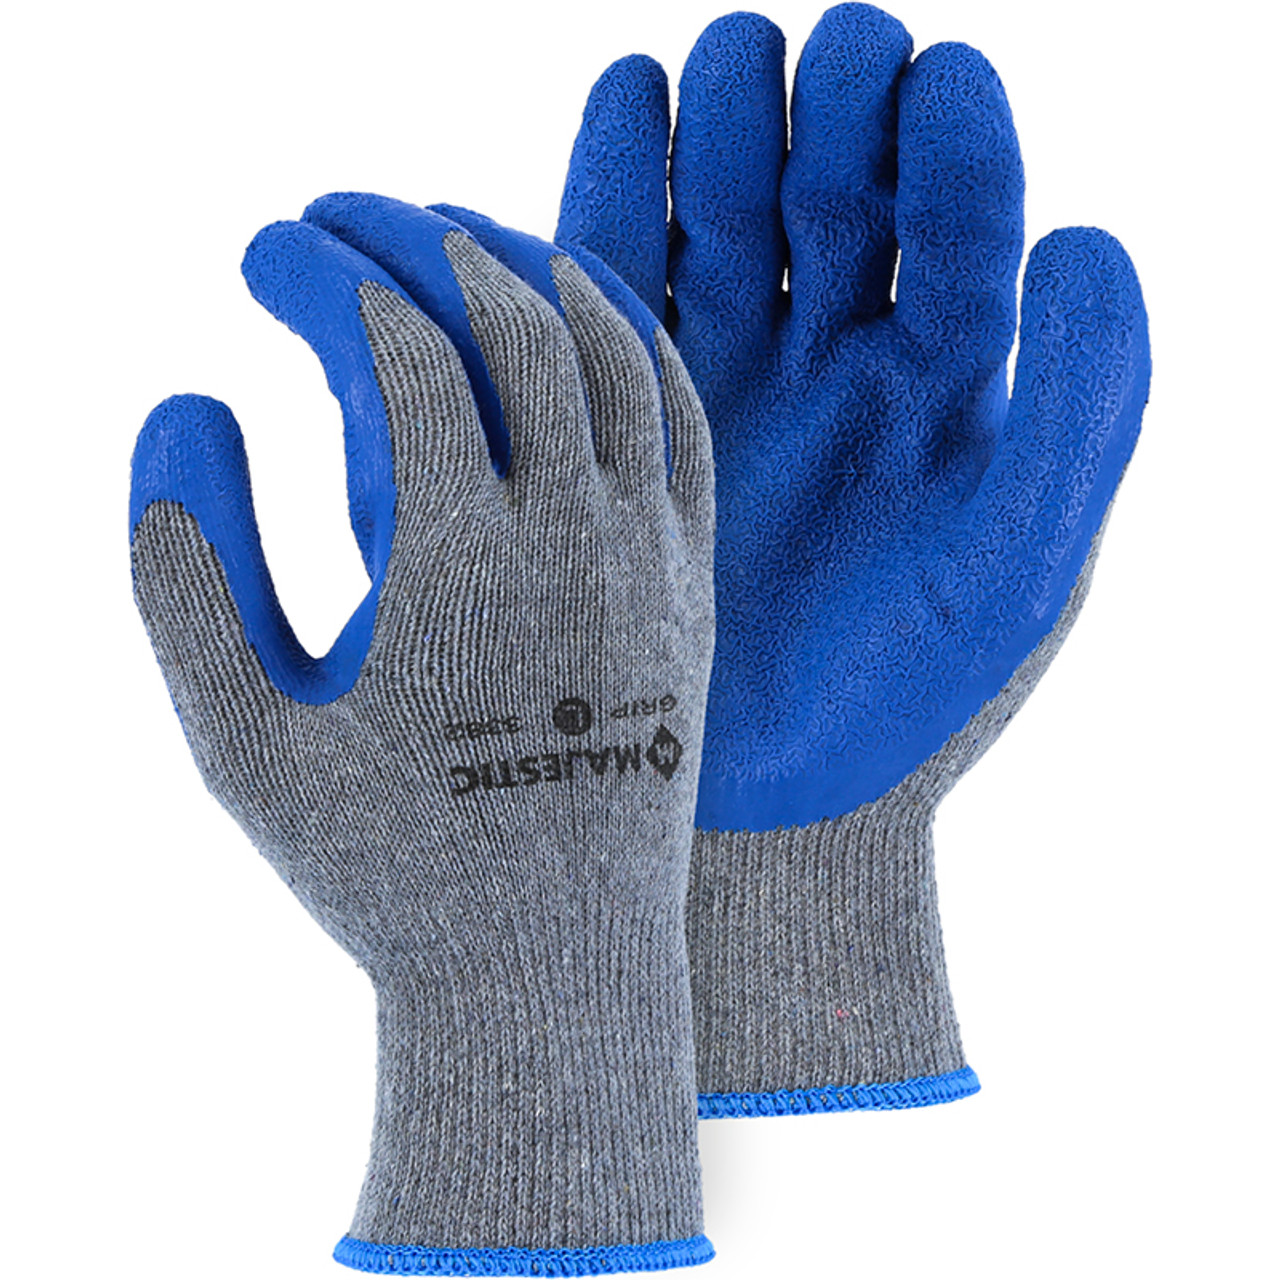 Majestic M Safe Grip Glove with Wrinkled Latex Palm 3382 - Box of 12 Pair